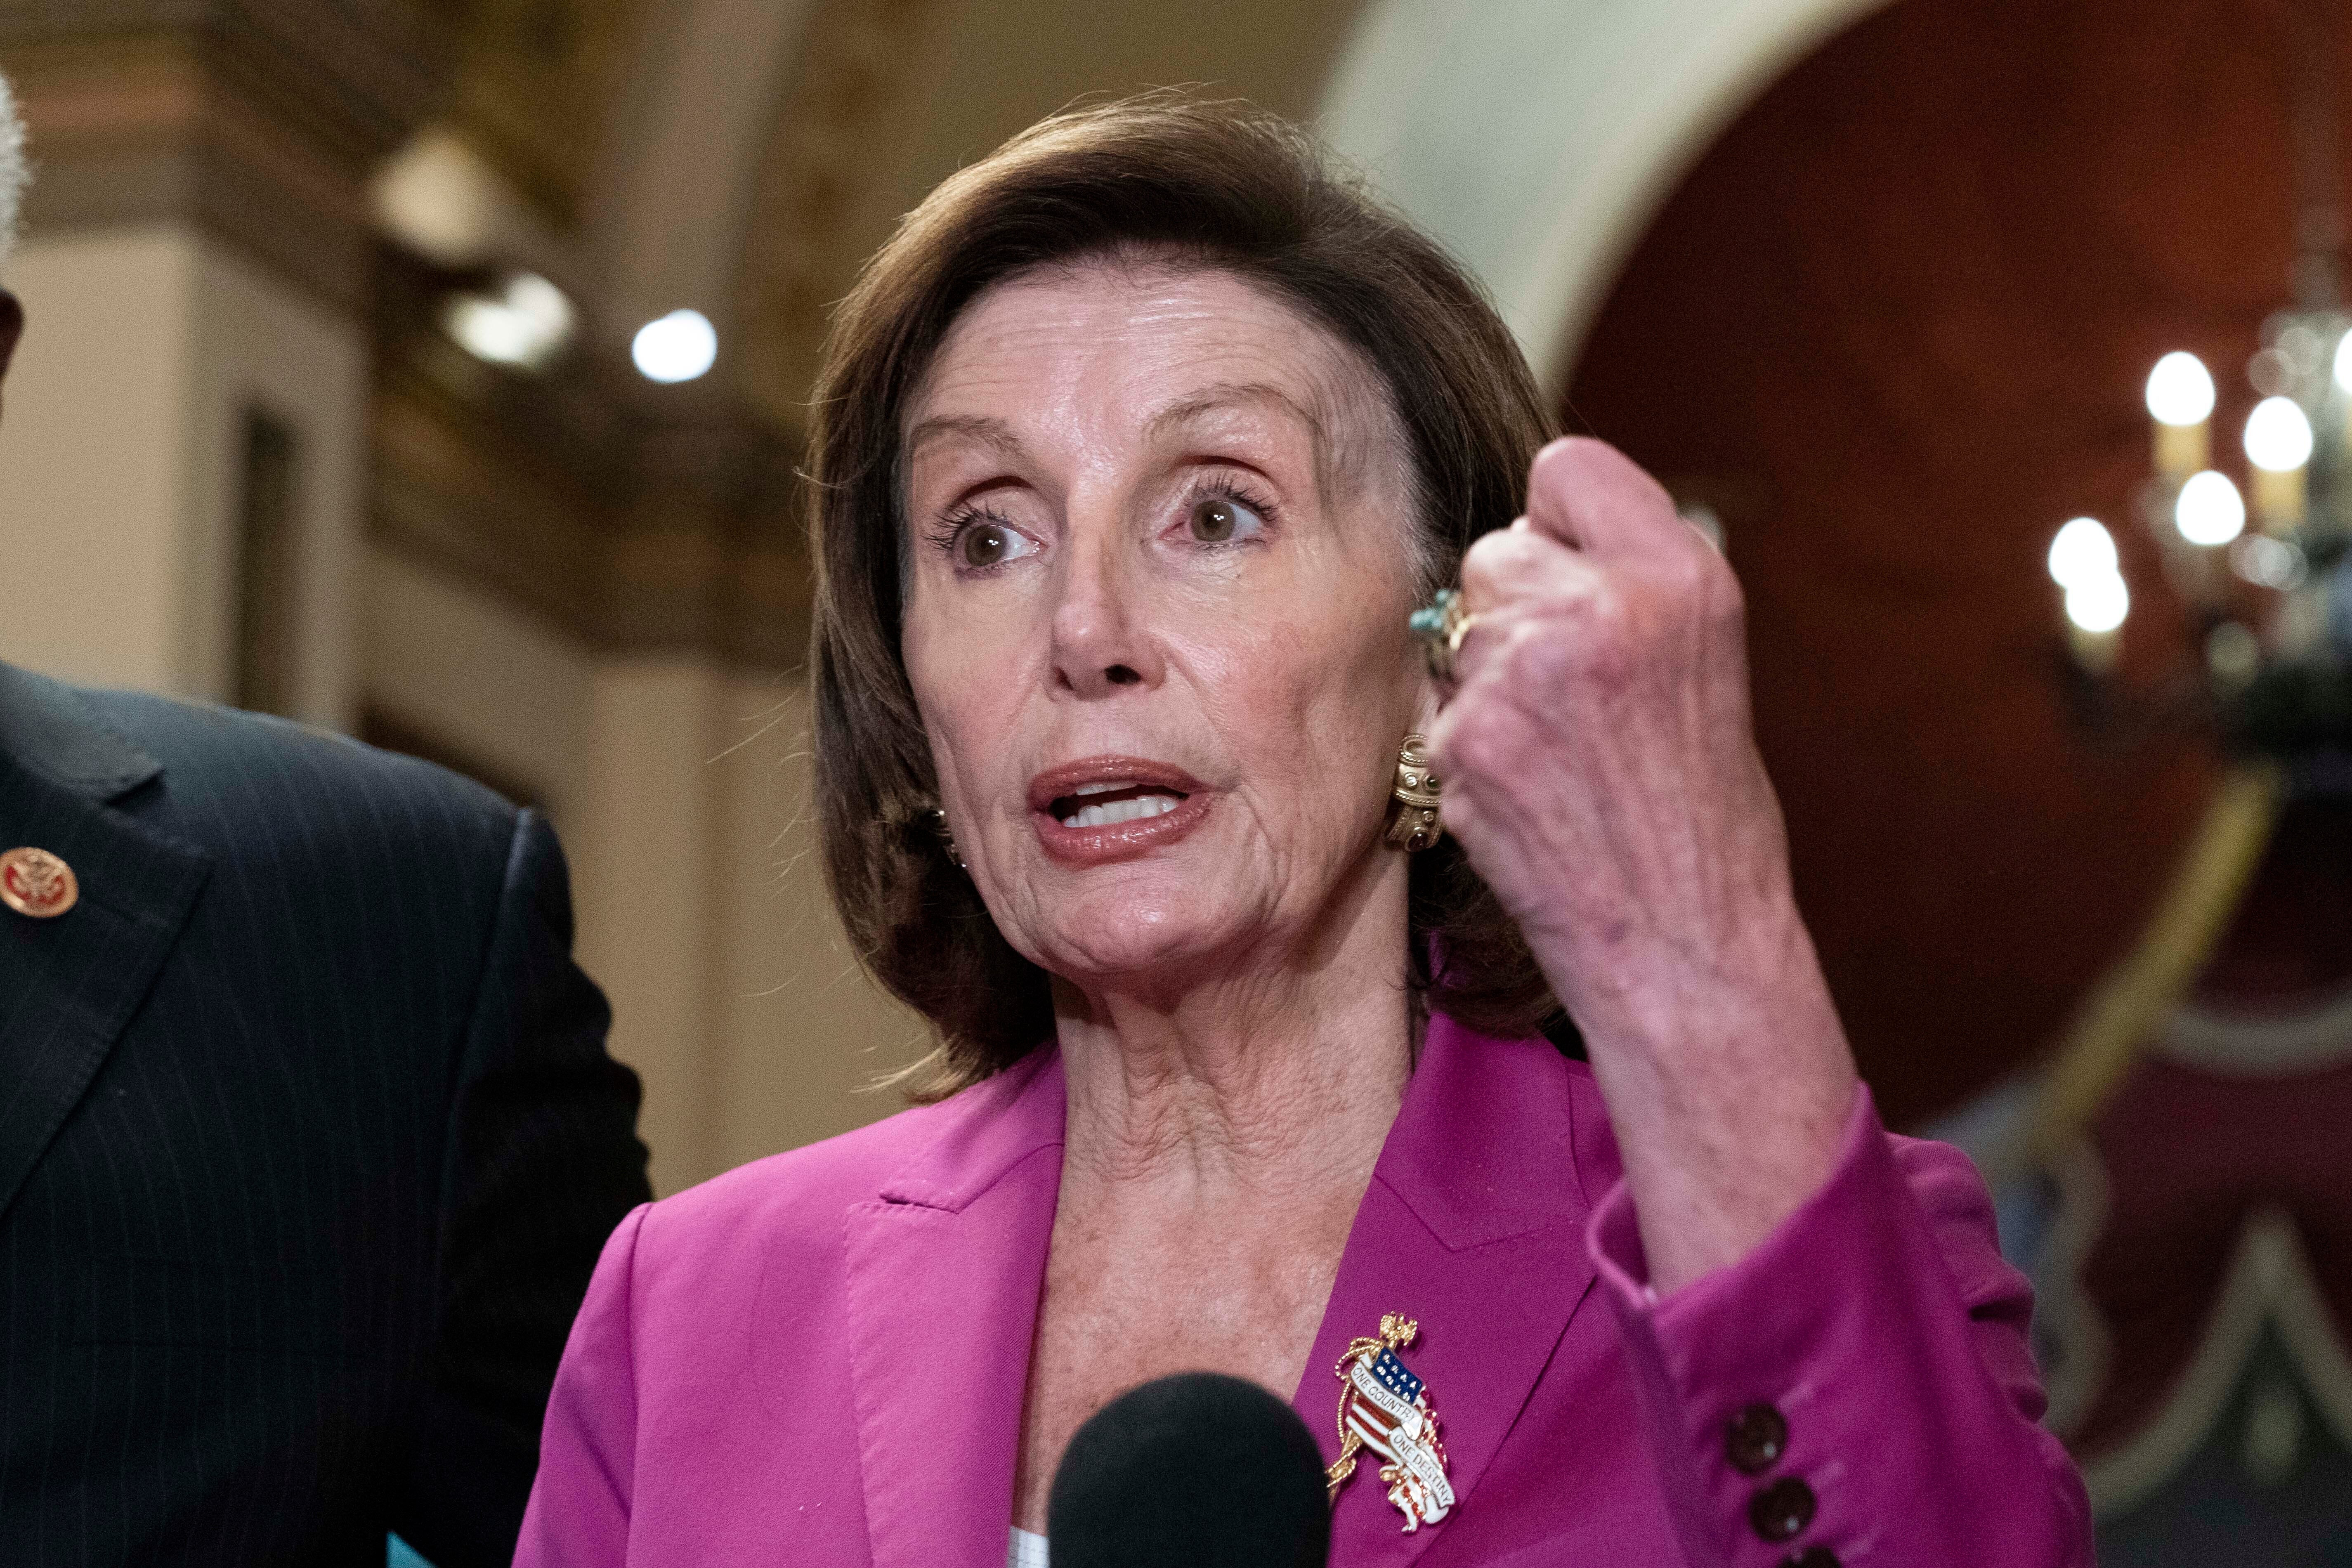 Pelosi may well be one of the most effective Speakers for 50 years